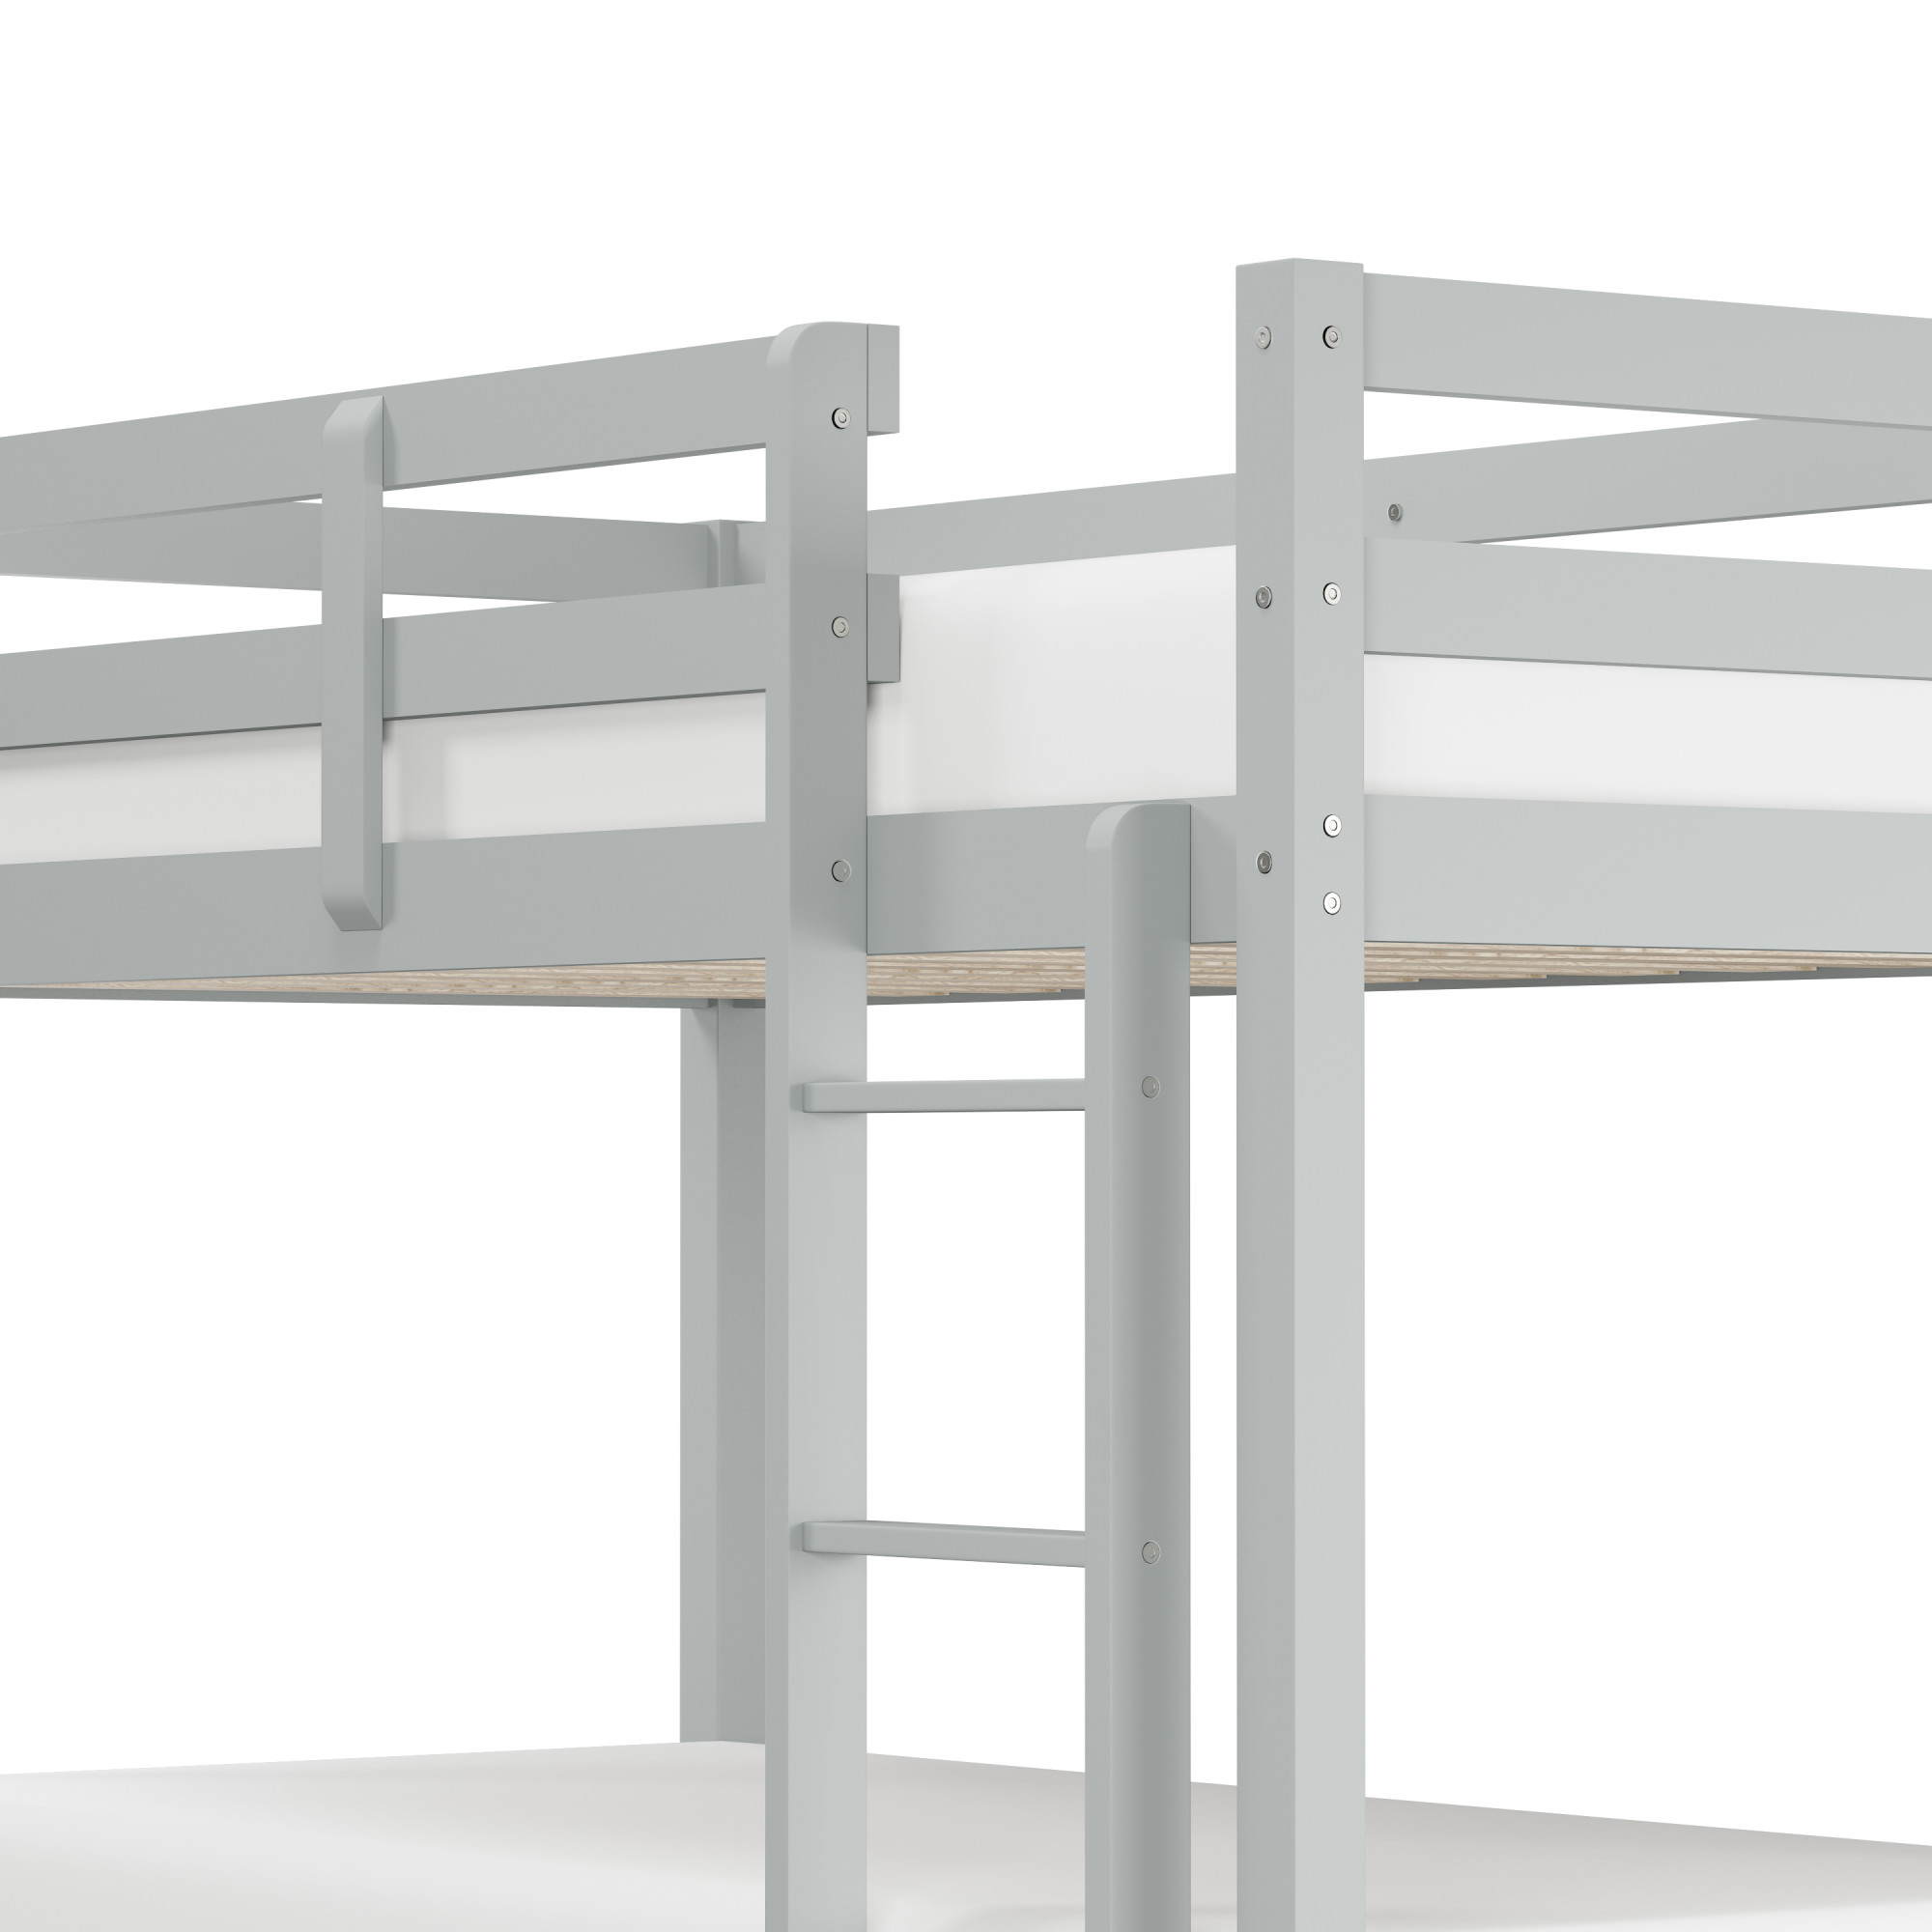 Hillsdale Caspian Twin Over Twin Bunk Bed with Hanging Night Tray, Multiple Colors - image 4 of 5